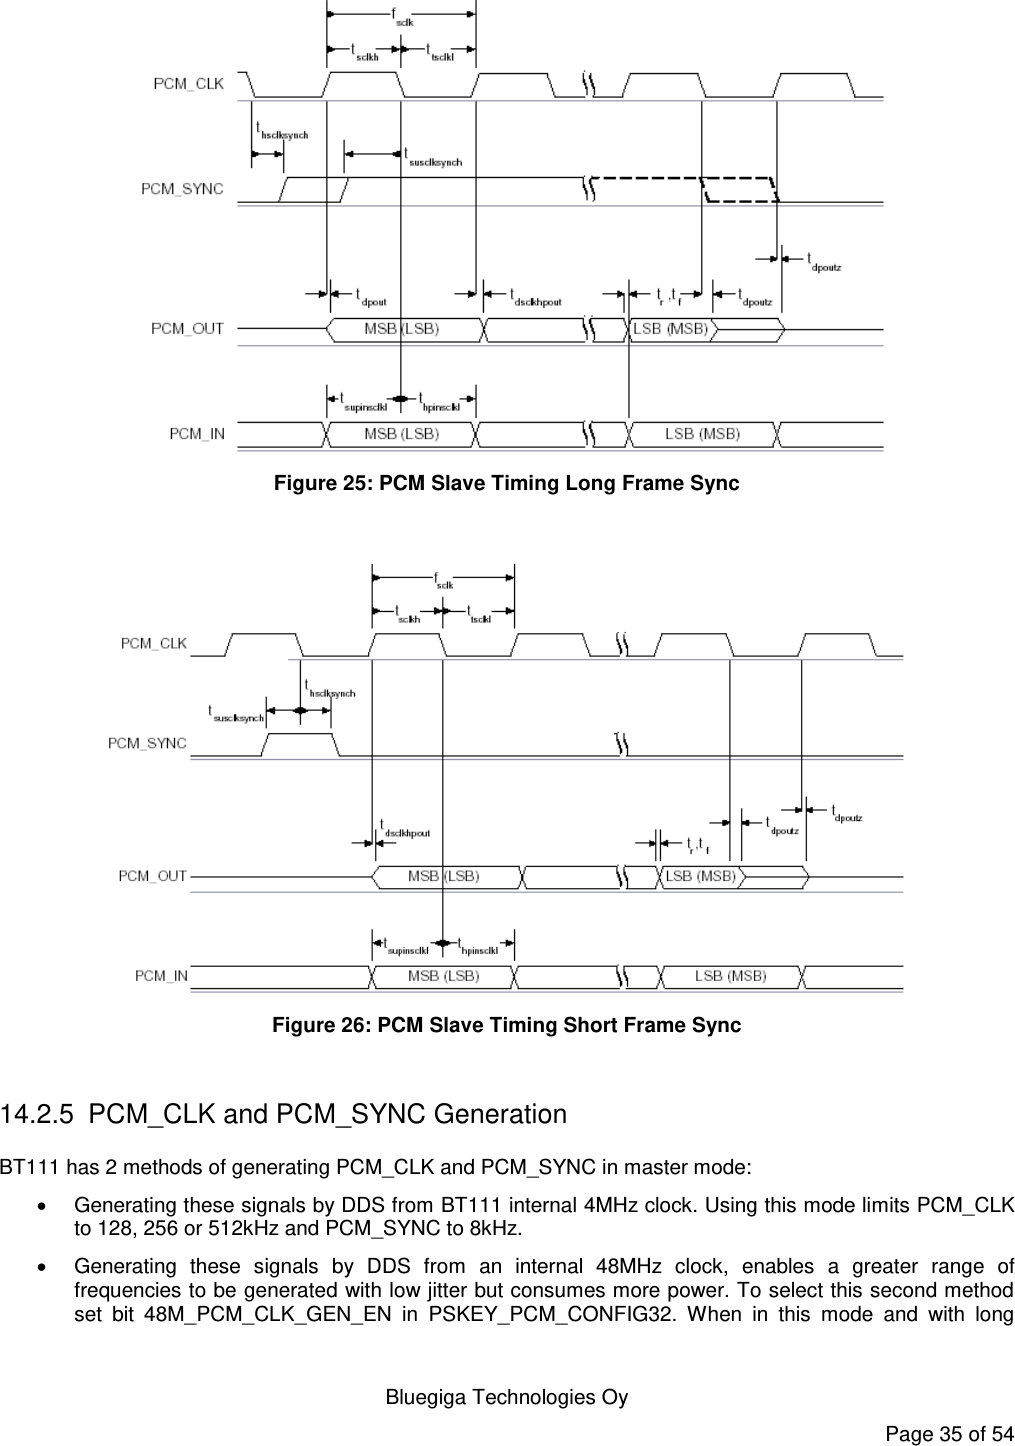    Bluegiga Technologies Oy Page 35 of 54  Figure 25: PCM Slave Timing Long Frame Sync   Figure 26: PCM Slave Timing Short Frame Sync  14.2.5  PCM_CLK and PCM_SYNC Generation BT111 has 2 methods of generating PCM_CLK and PCM_SYNC in master mode:   Generating these signals by DDS from BT111 internal 4MHz clock. Using this mode limits PCM_CLK to 128, 256 or 512kHz and PCM_SYNC to 8kHz.   Generating  these  signals  by  DDS  from  an  internal  48MHz  clock,  enables  a  greater  range  of frequencies to be generated with low jitter but consumes more power. To select this second method set  bit  48M_PCM_CLK_GEN_EN  in  PSKEY_PCM_CONFIG32.  When  in  this  mode  and  with  long 